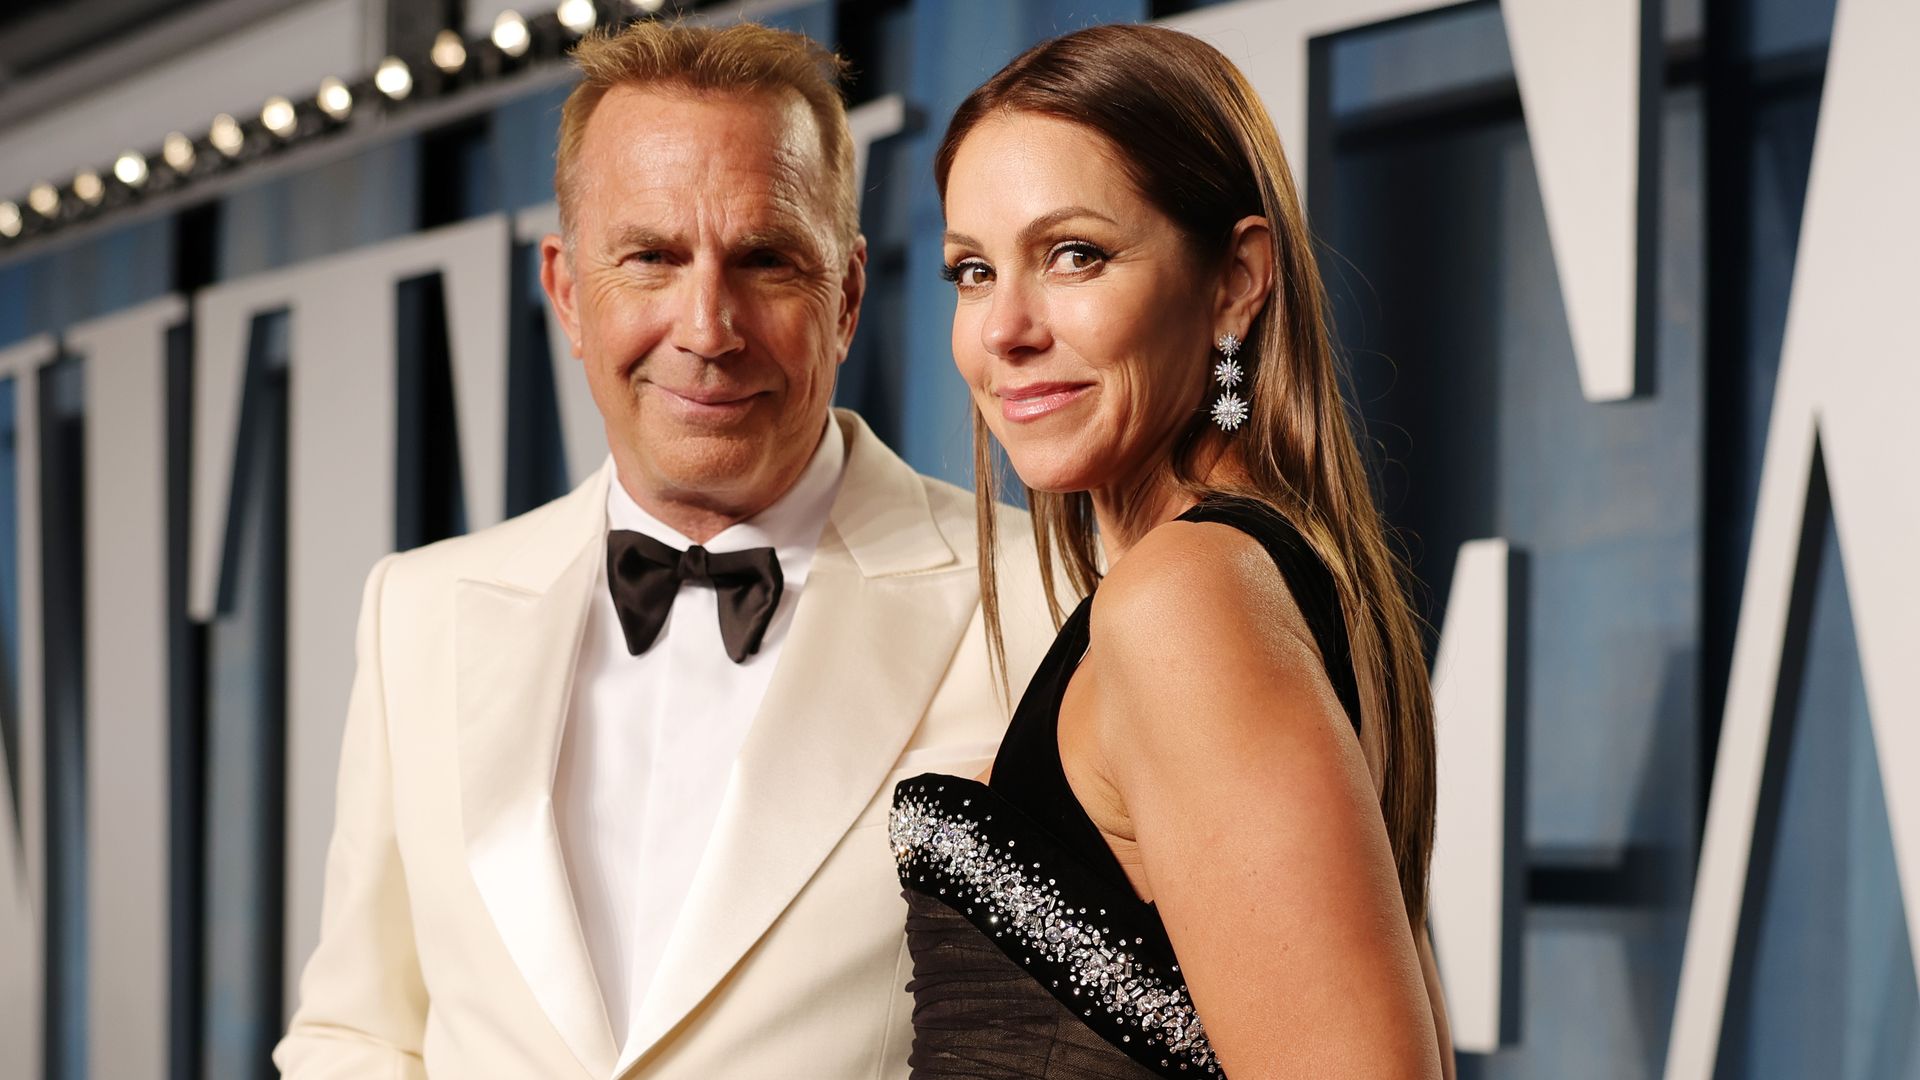 Kevin Costner and ex-wife Christine Baumgartner reach unexpected end to divorce proceedings: Report